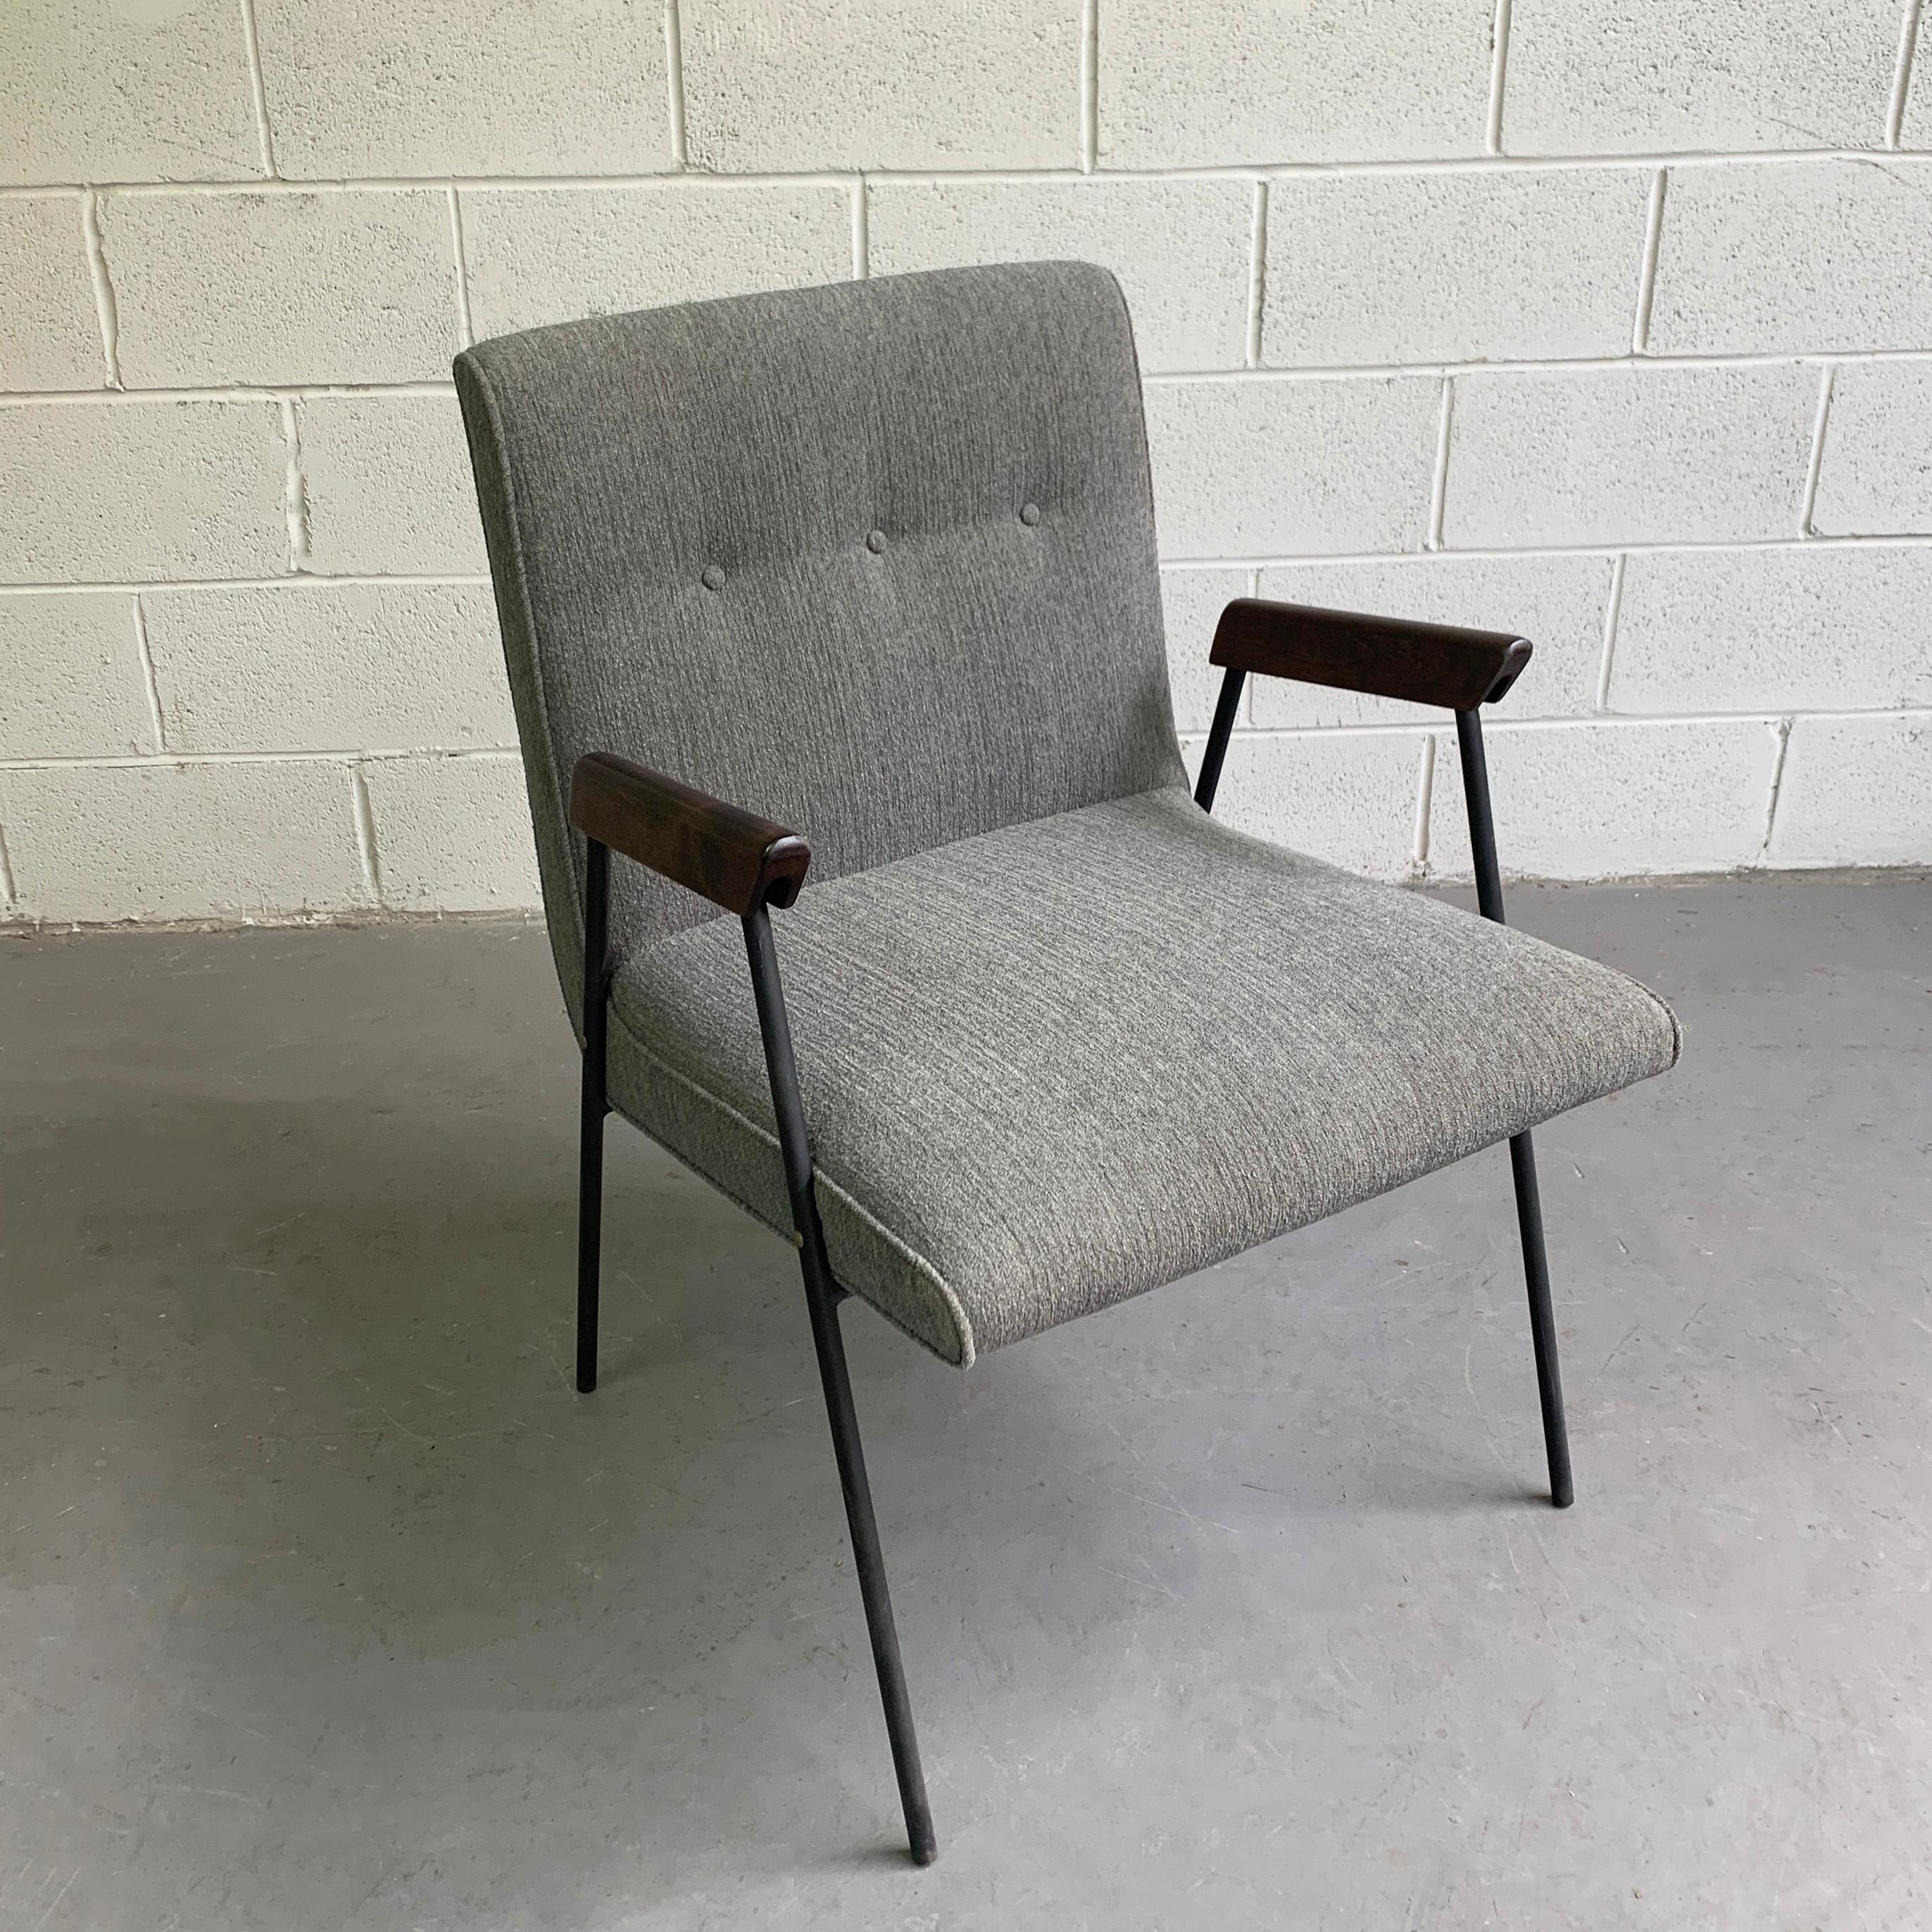 Mid-Century Modern Wrought Iron Upholstered Armchair Attributed to Milo Baughman, Pacific Iron